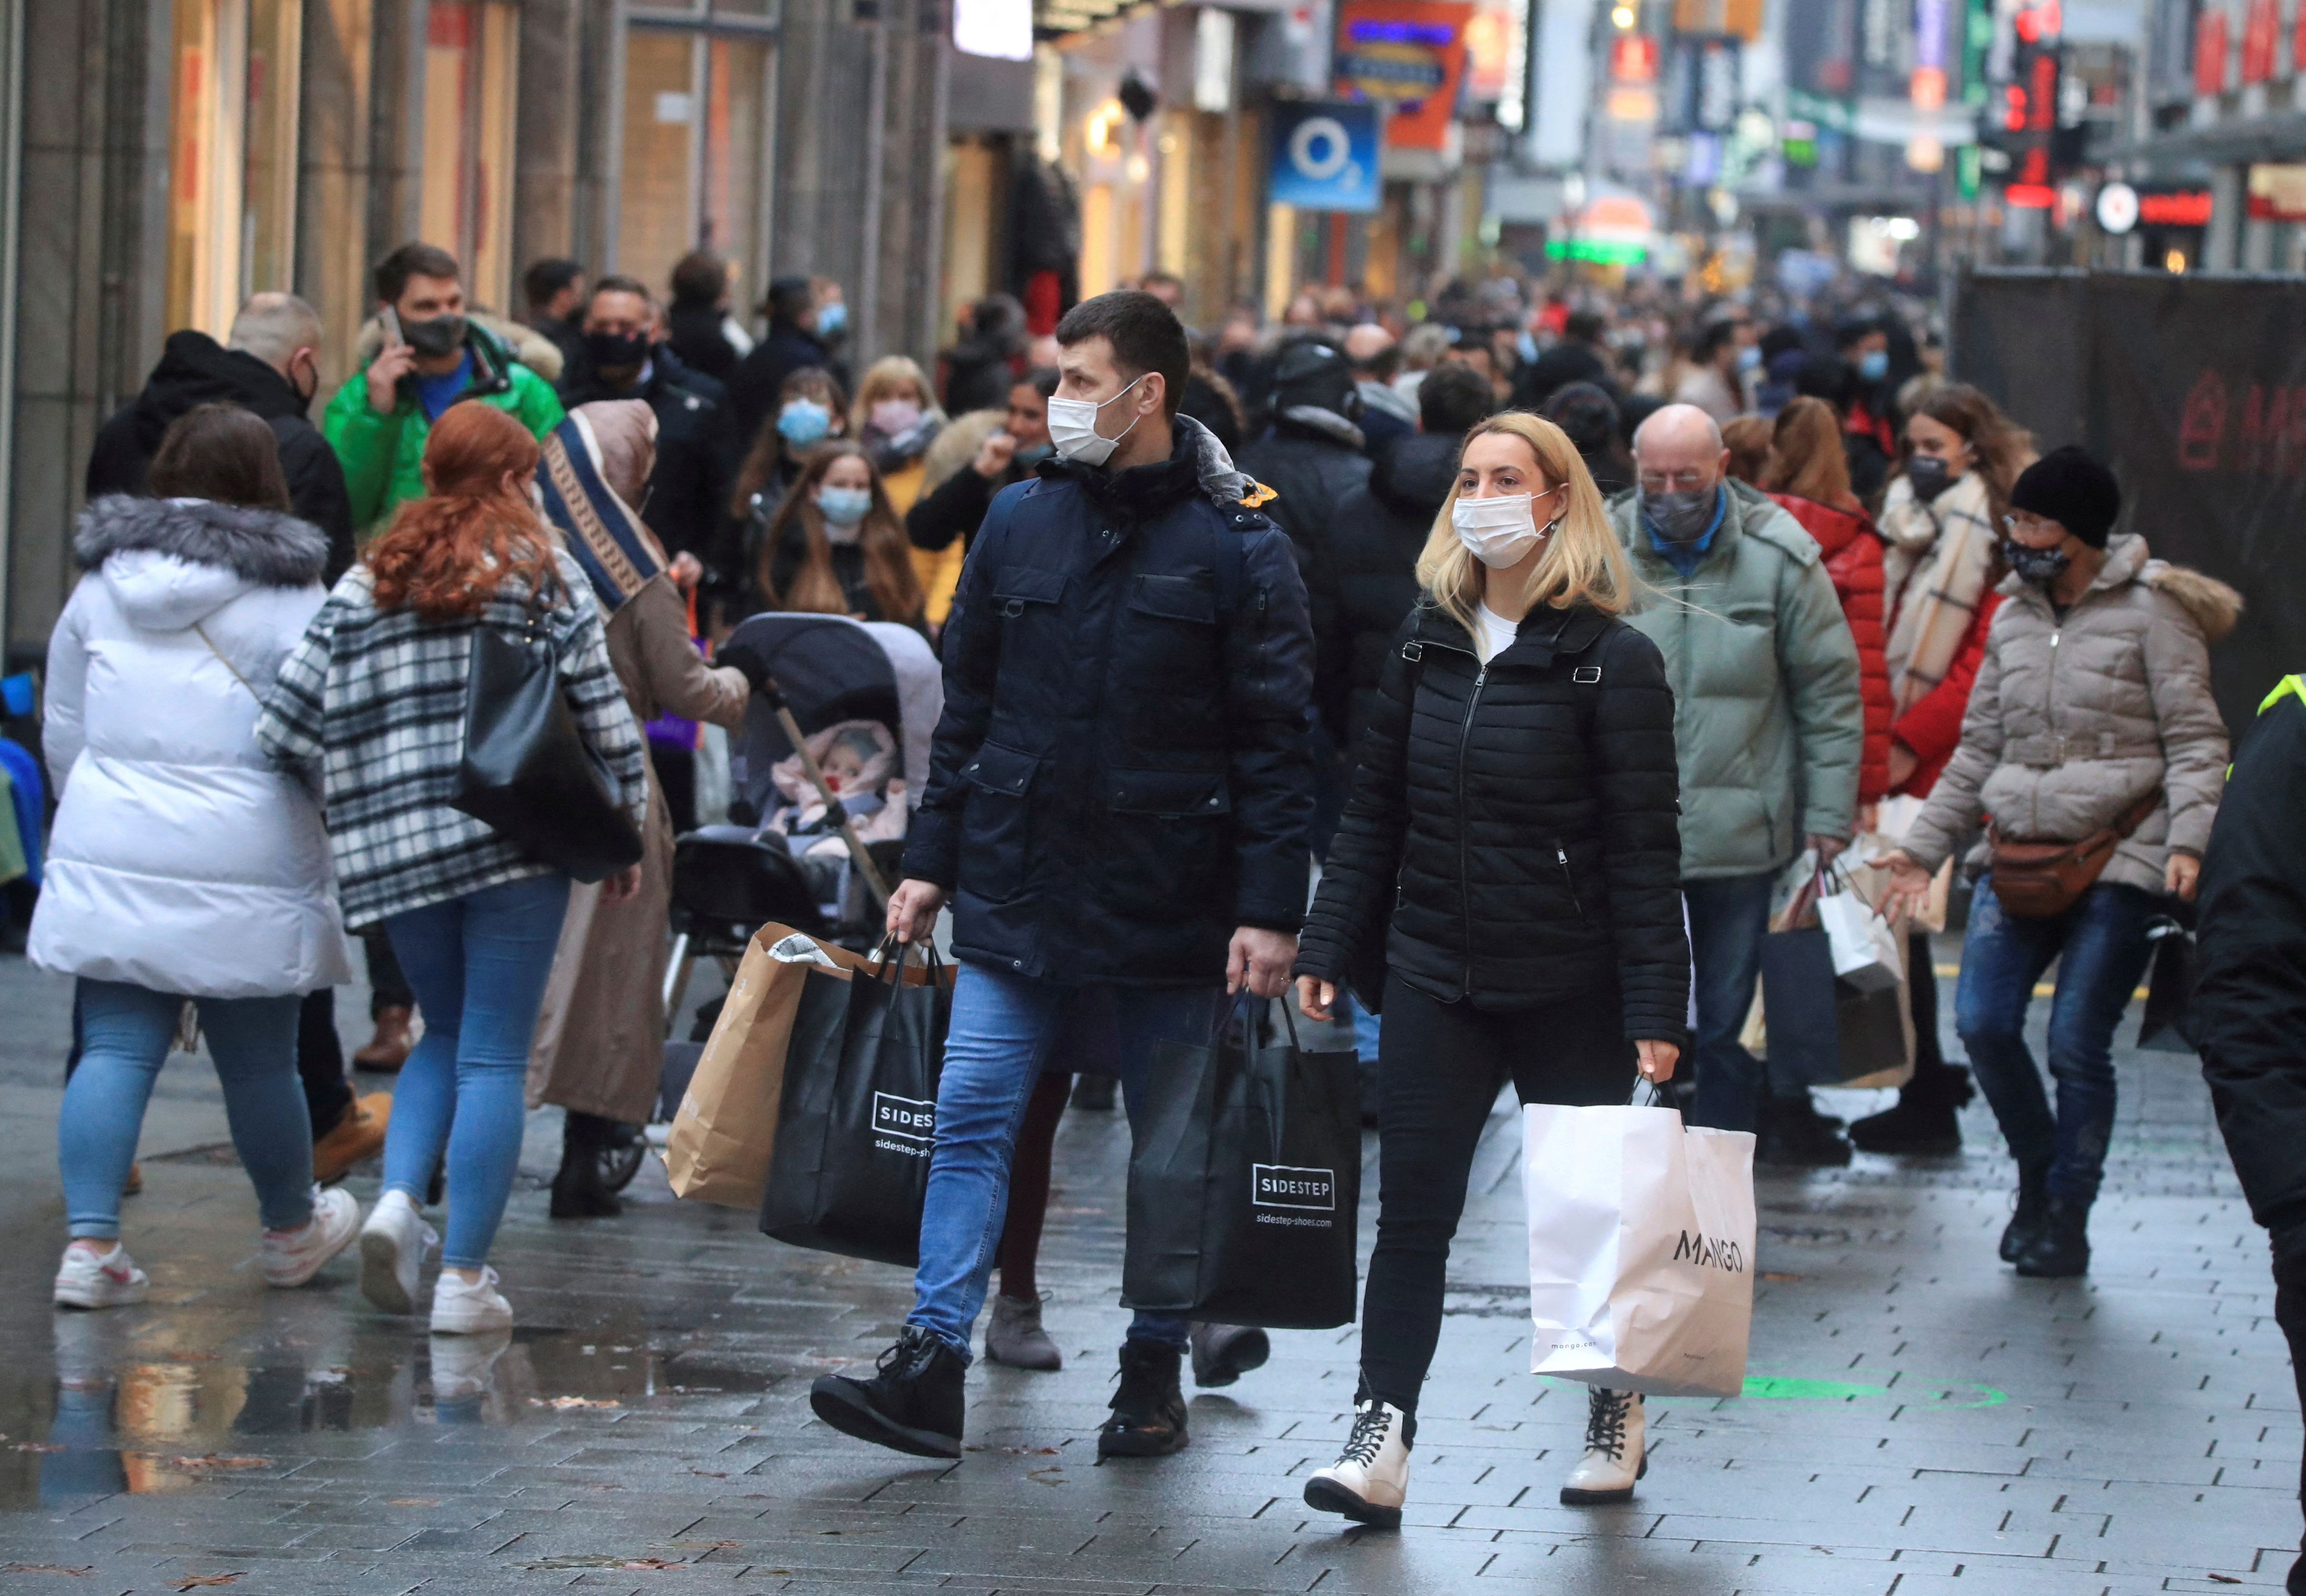 Christmas shoppers wear masks and fill Cologne's main shopping street Hohe Strasse (High Street) during the coronavirus disease (COVID-19) pandemic in Cologne